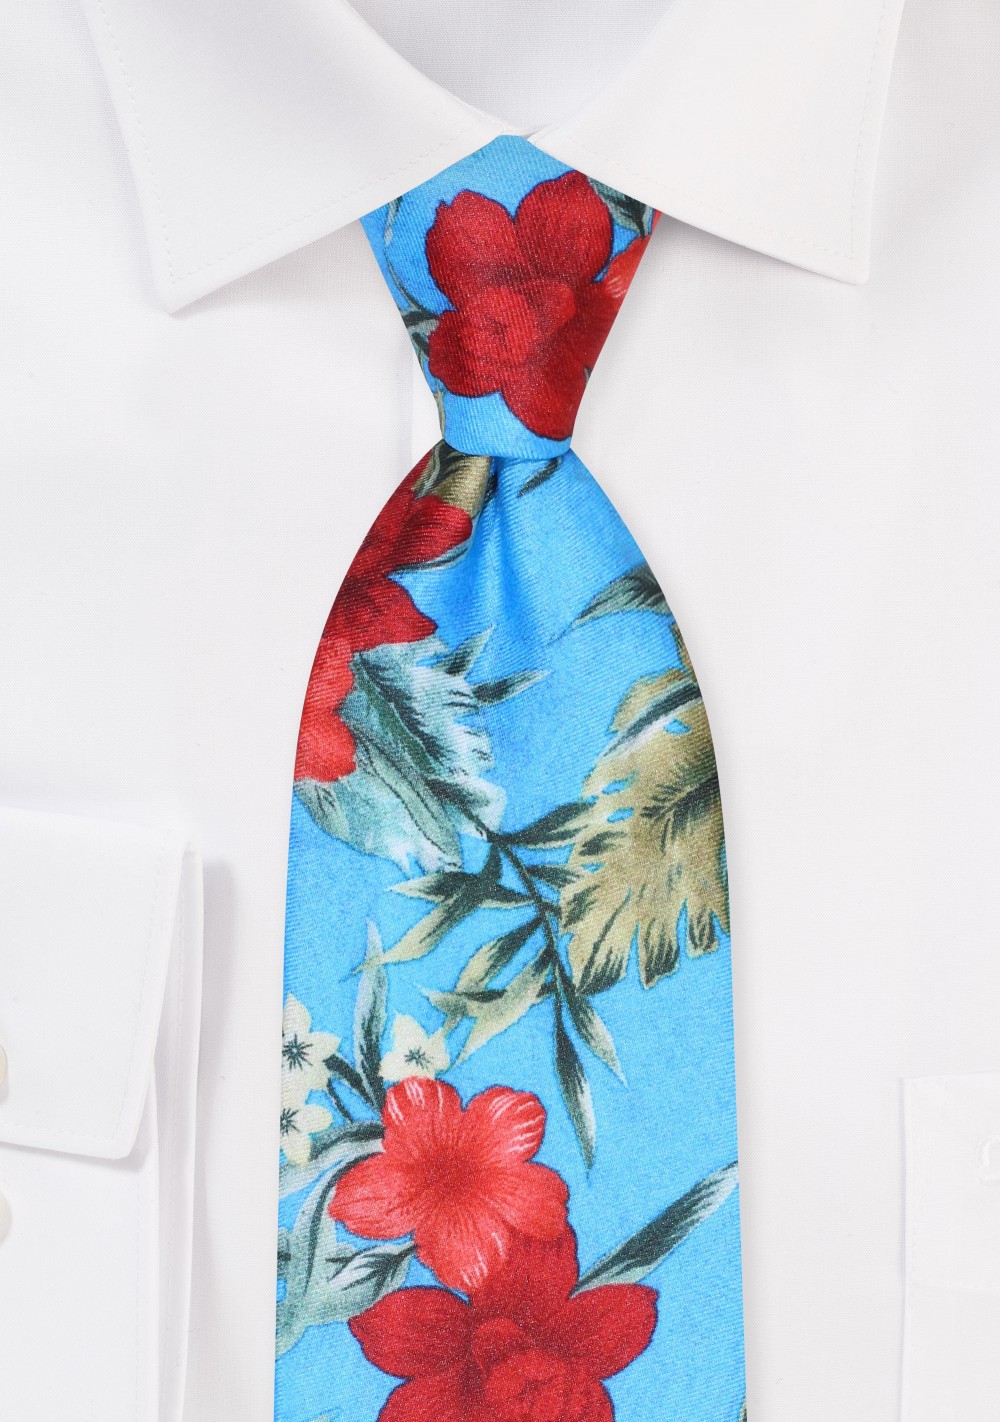 Tropical Print Tie in Aqua, Greens, and Red